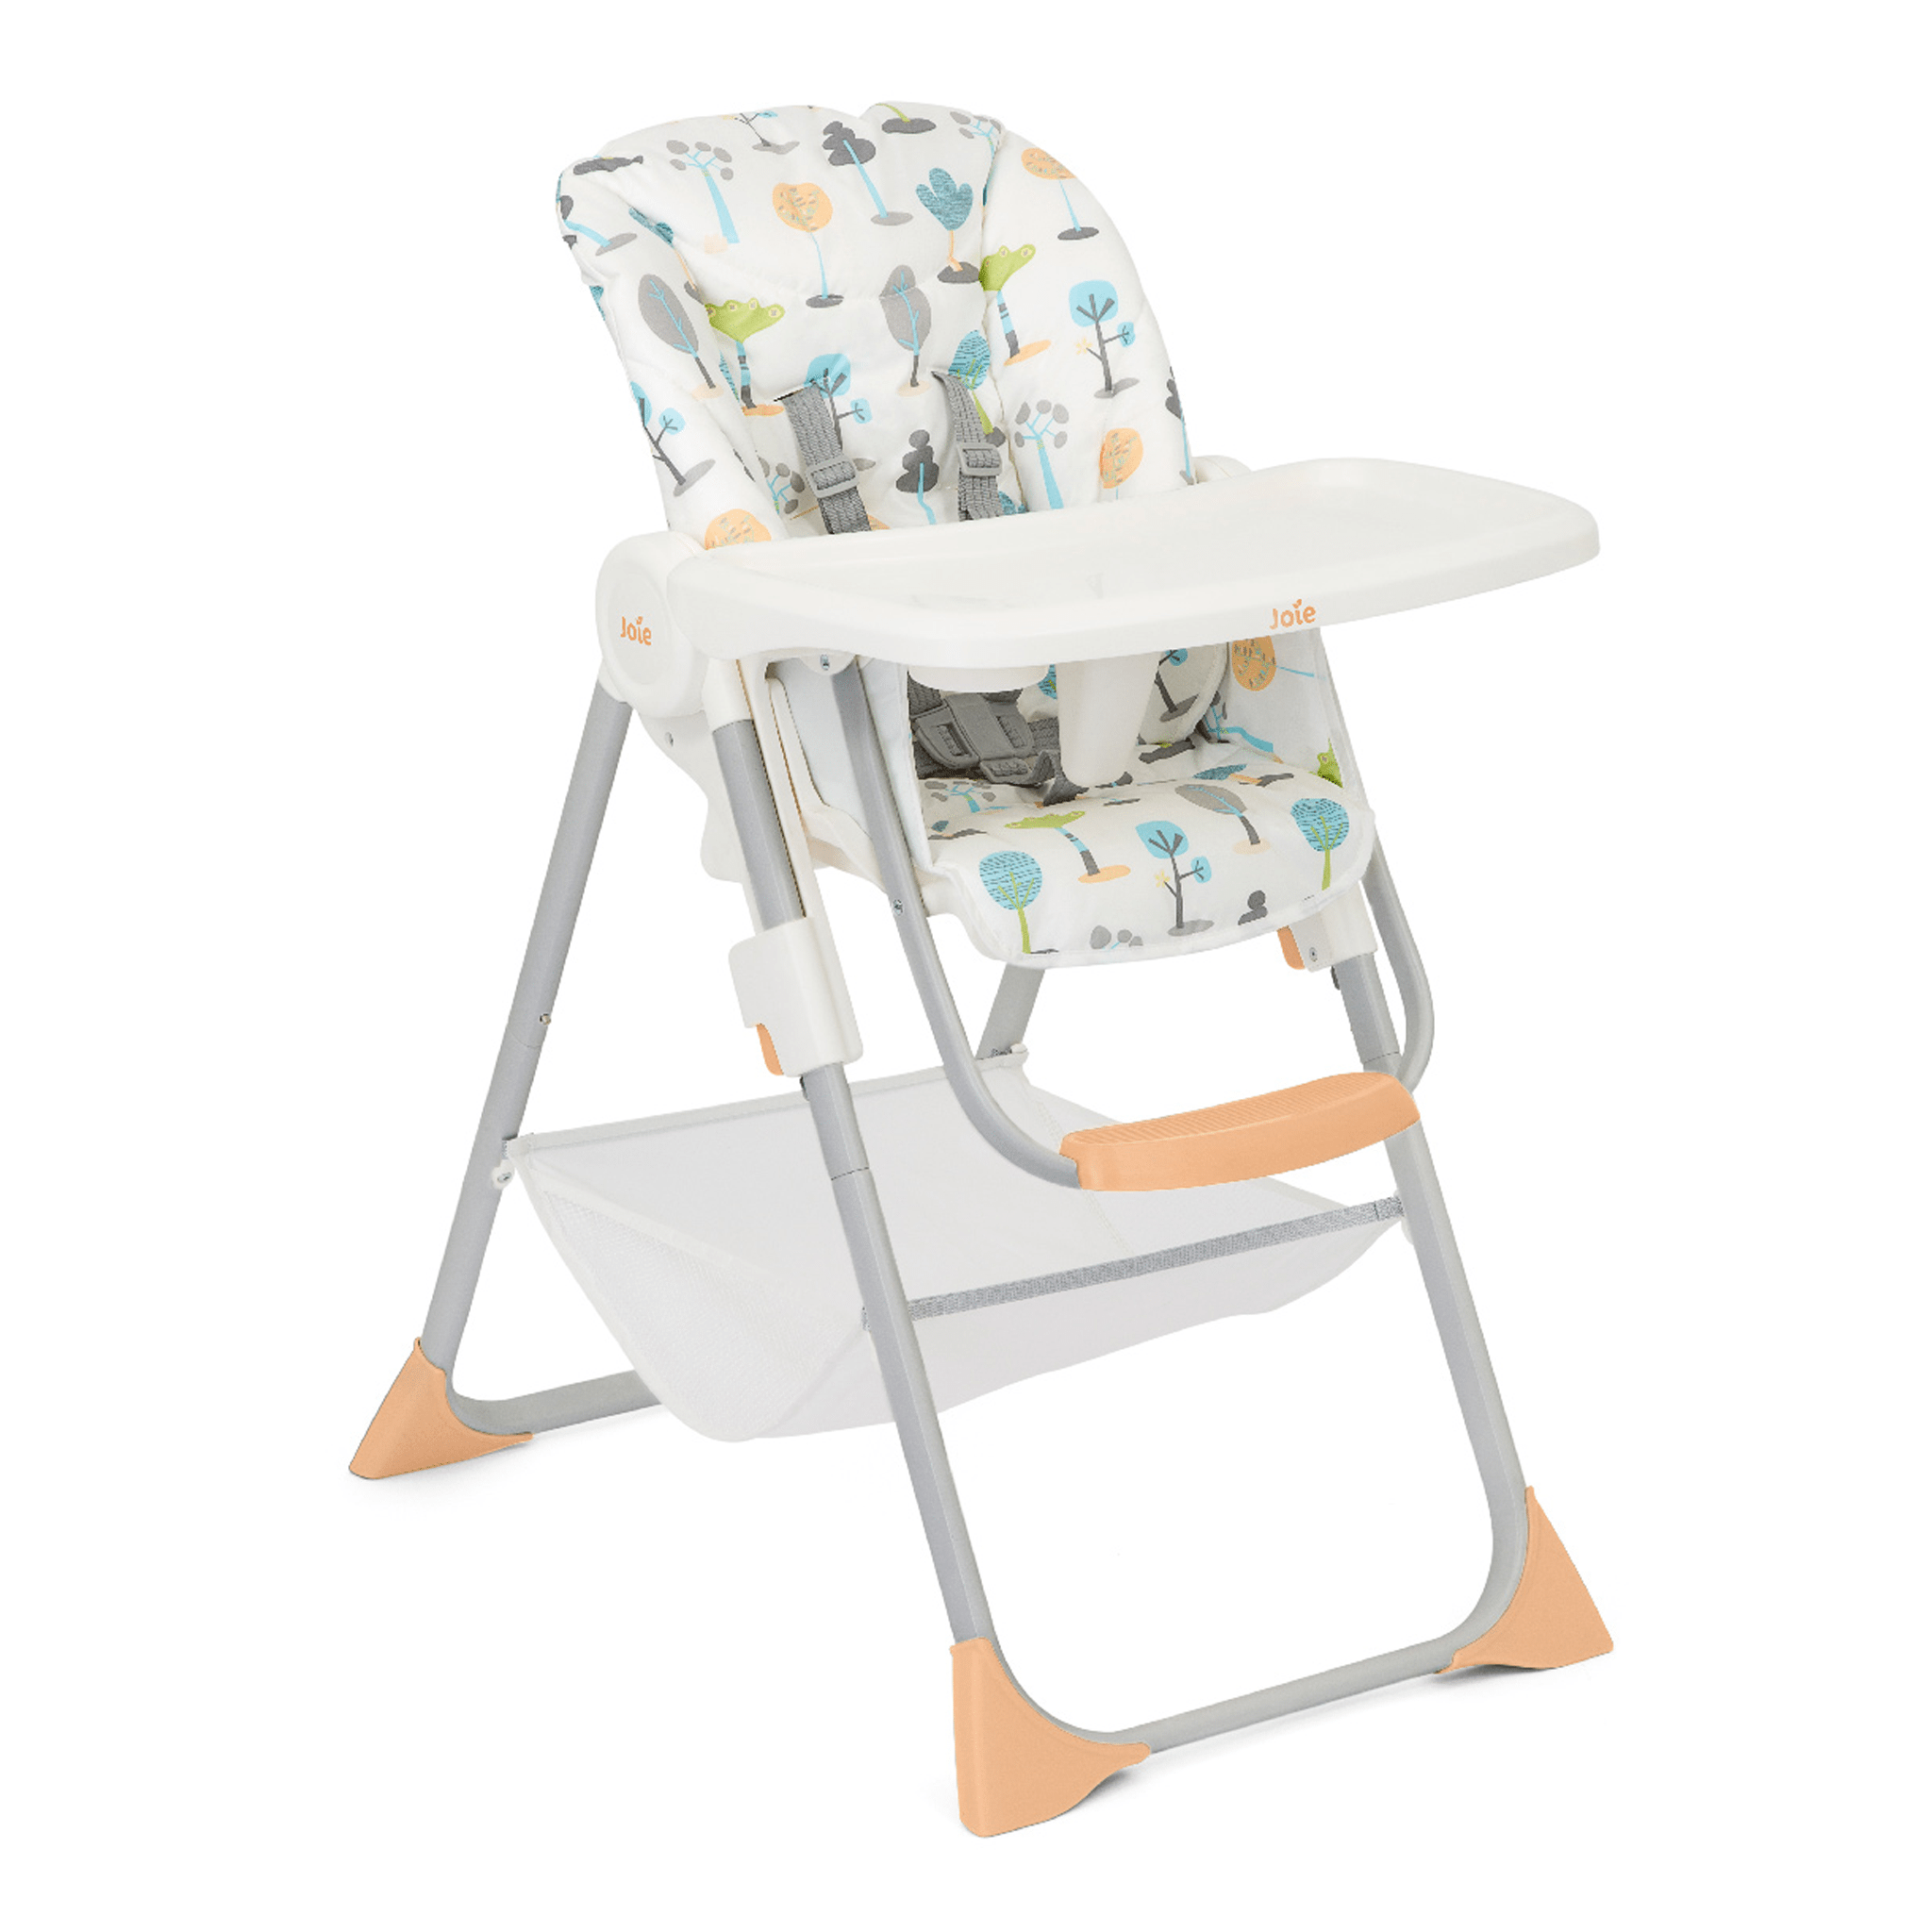 Joie baby highchairs Joie Snacker 2-in-1 Highchair Pastel Forest H1901BAPTF000